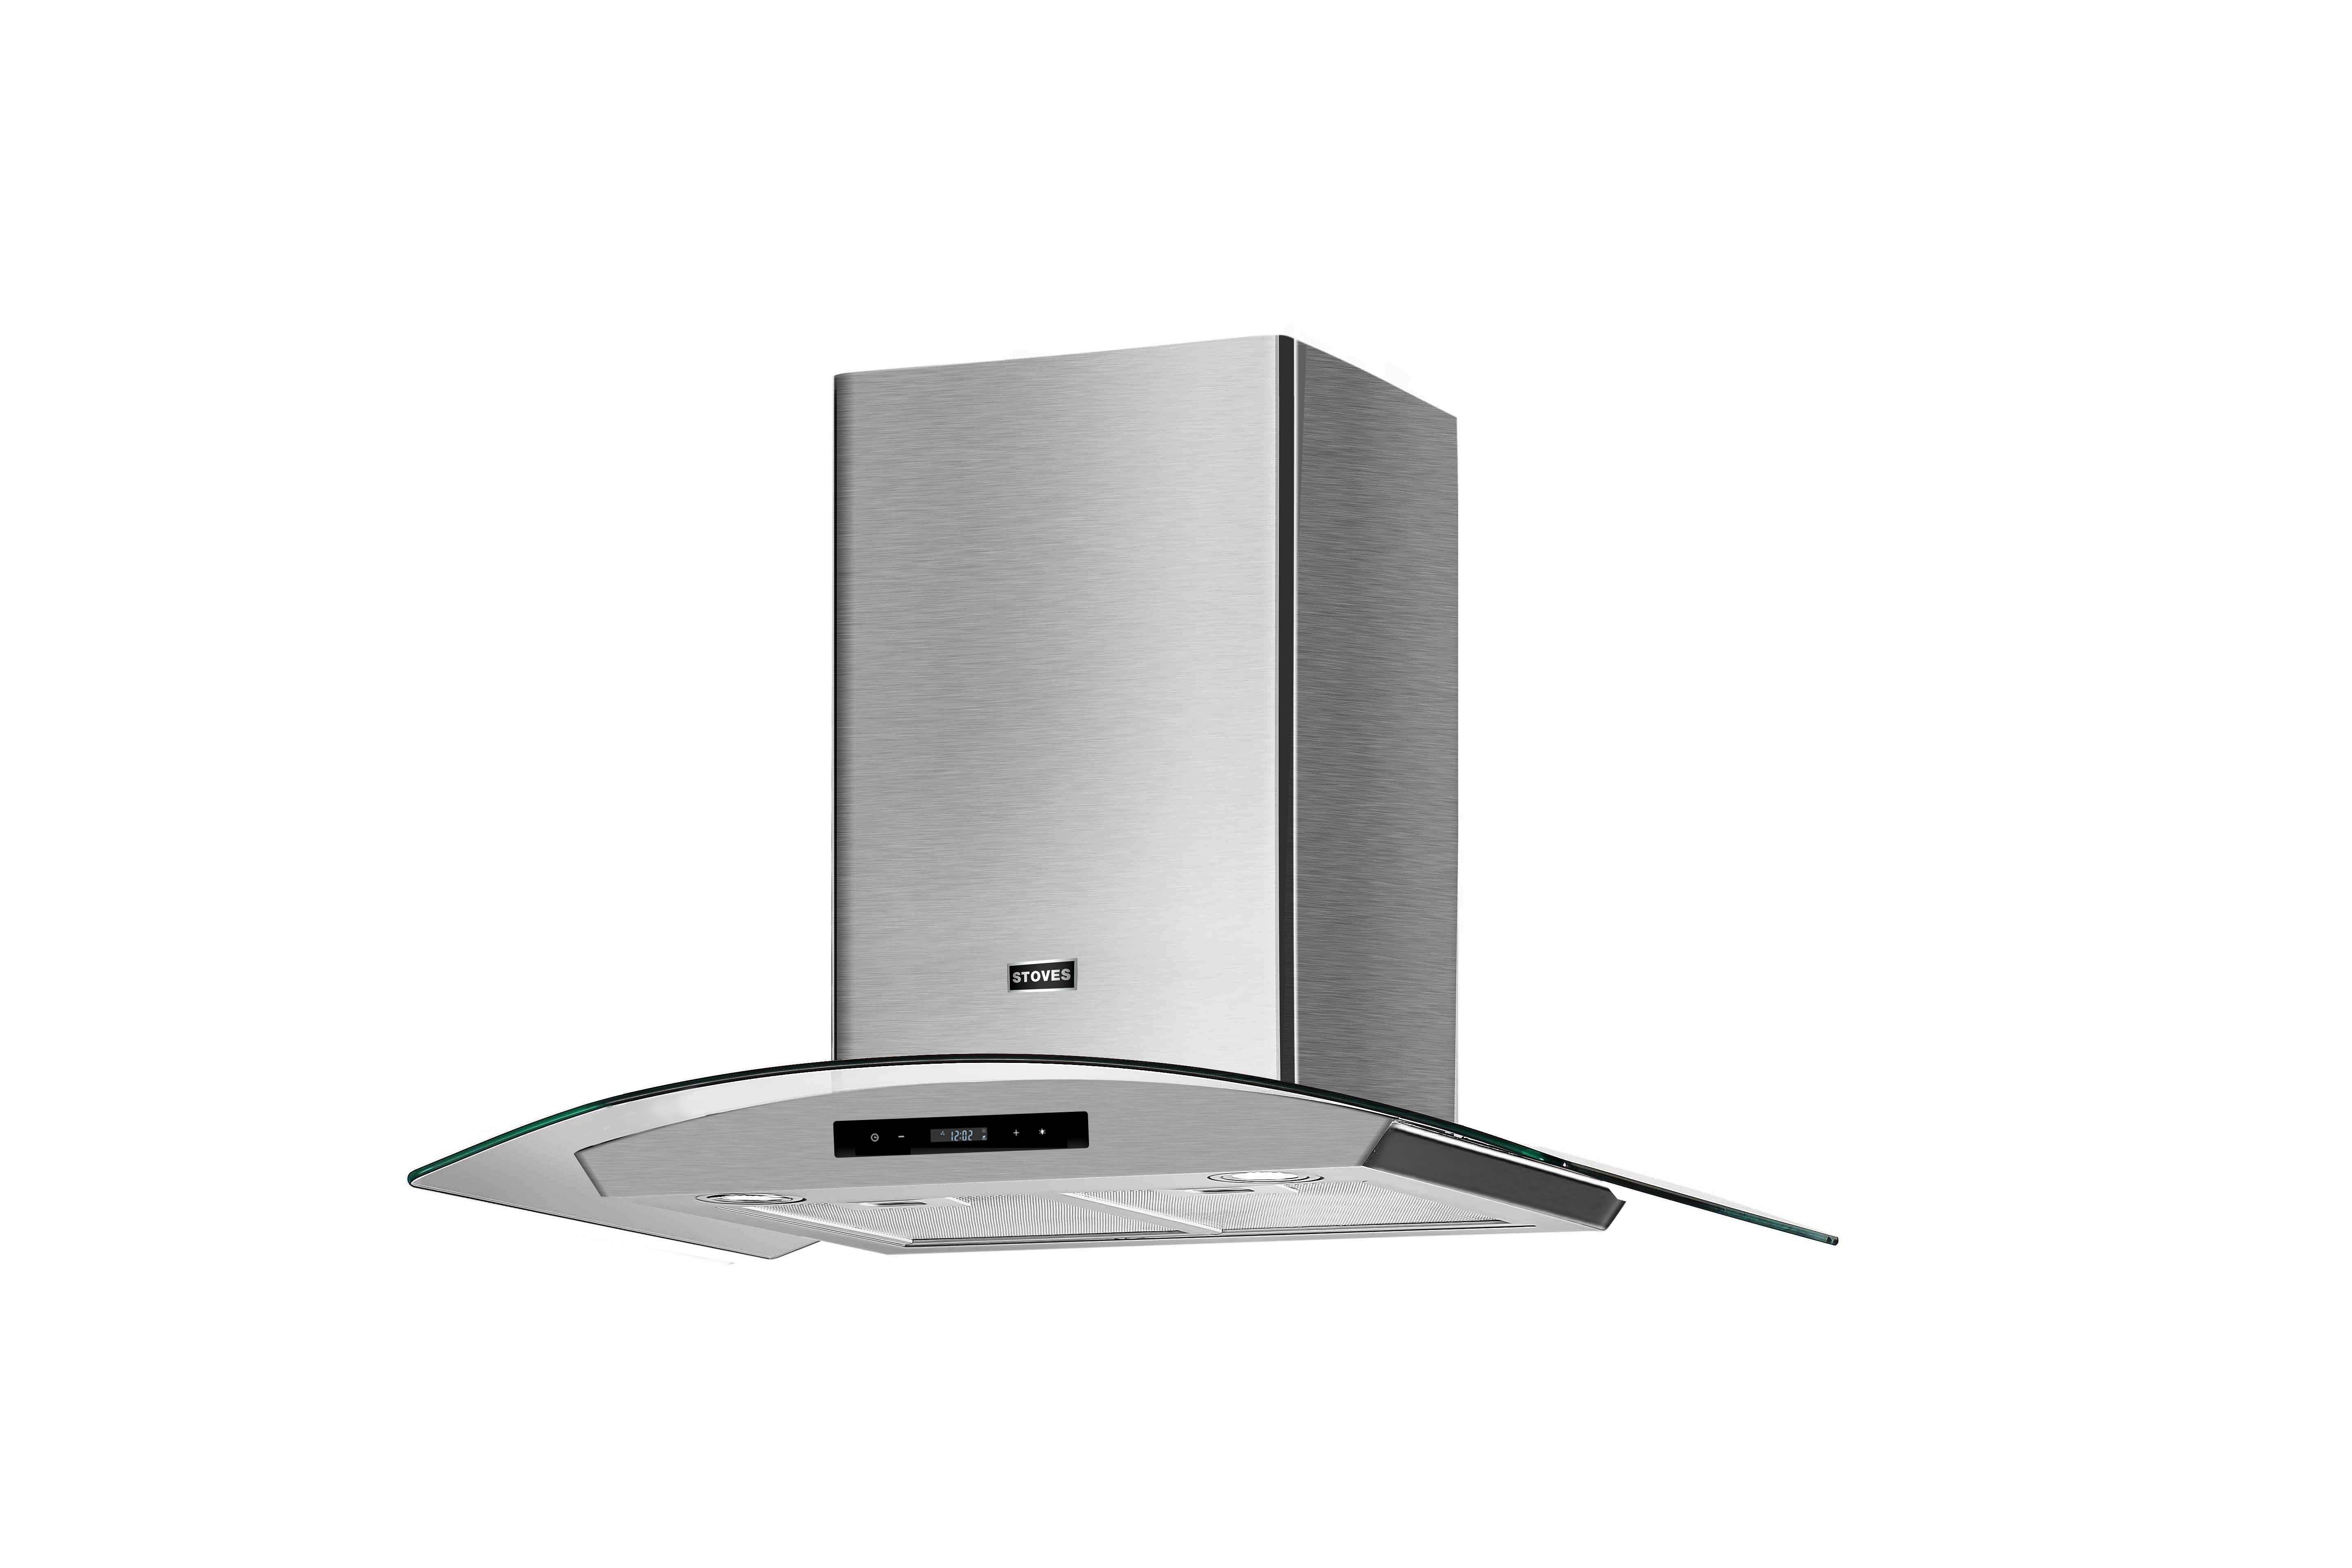 60cm curved glass hood with 3 fan speeds + booster, digital controls and two LED lights.